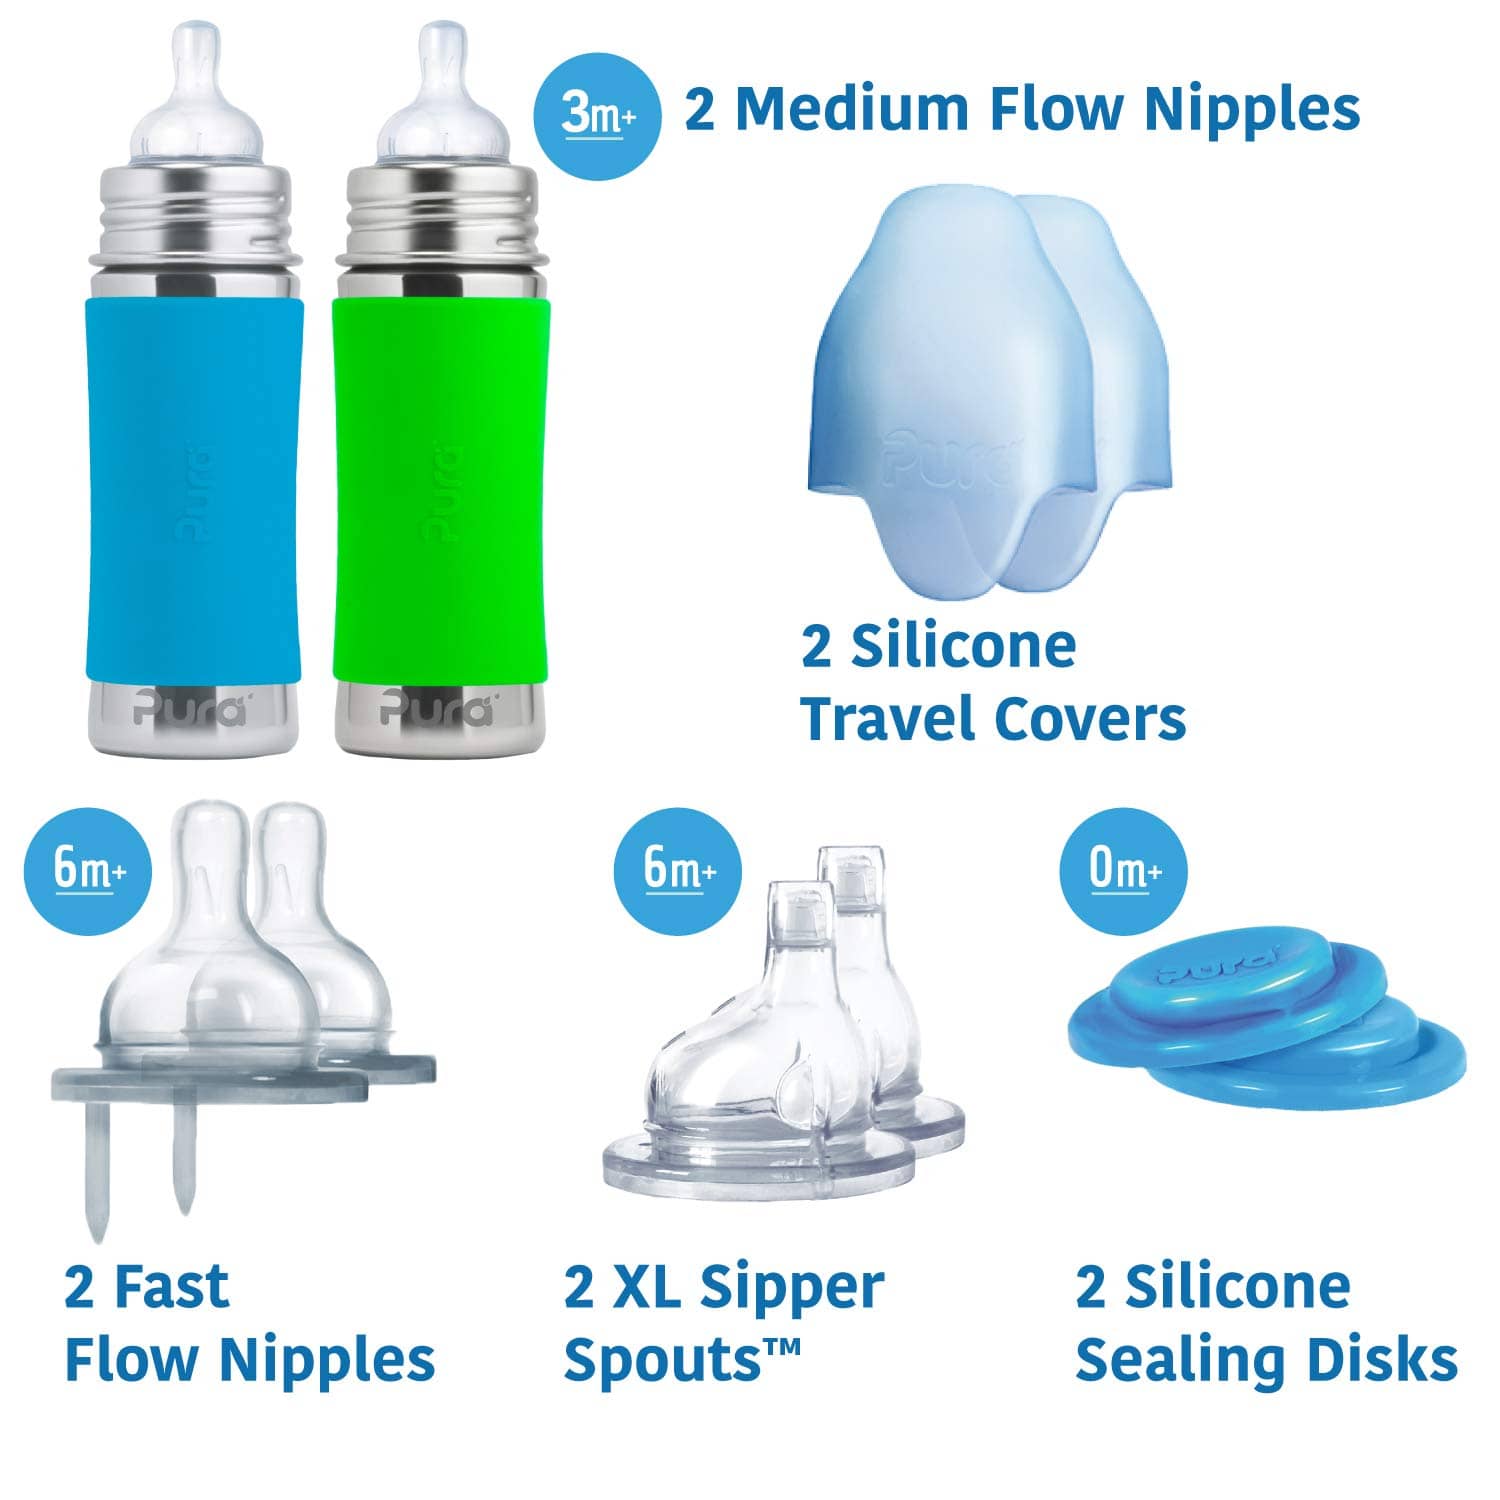 Pura stainless steel baby bottle kit with extra silicone nipples, caps and sippy tops